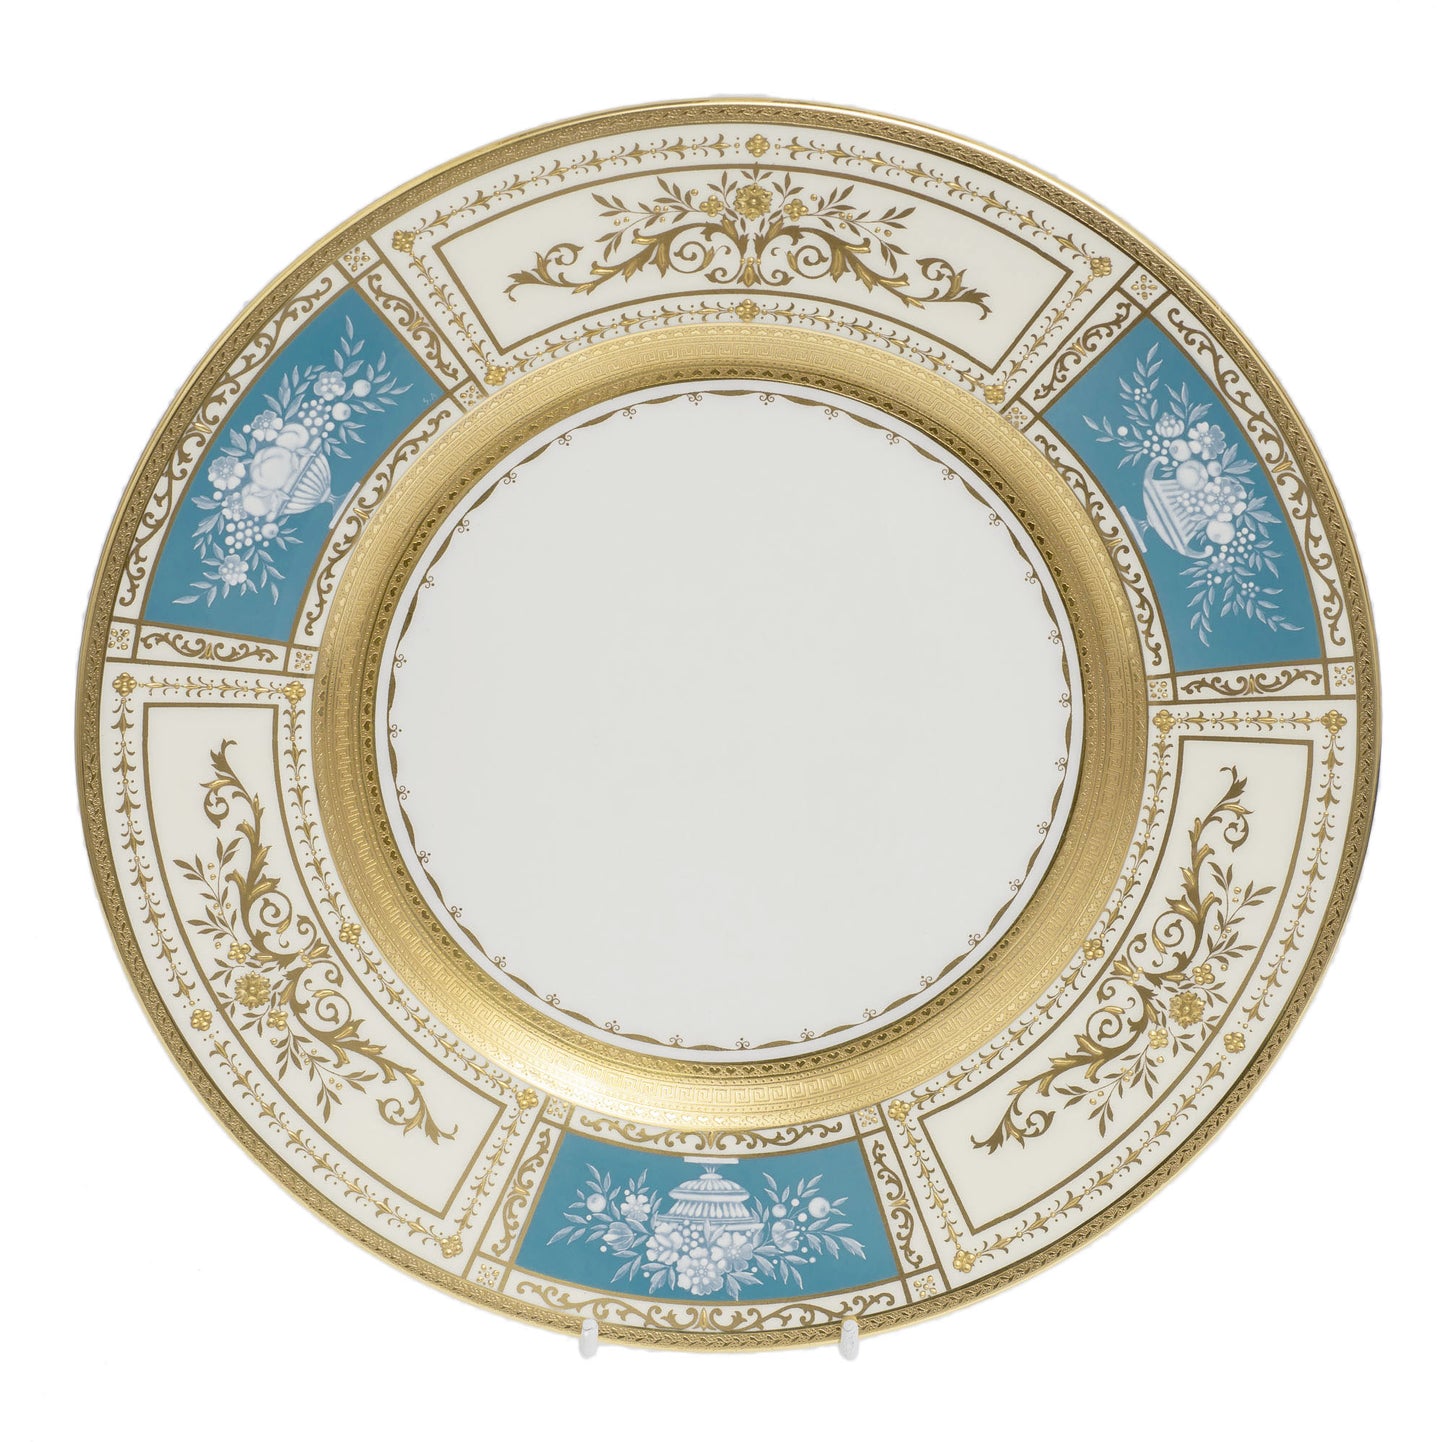 Minton Pate sur Pate Panel & Embossed Gold Dinner Plate - T Goode & Co, Mayfair (2915)